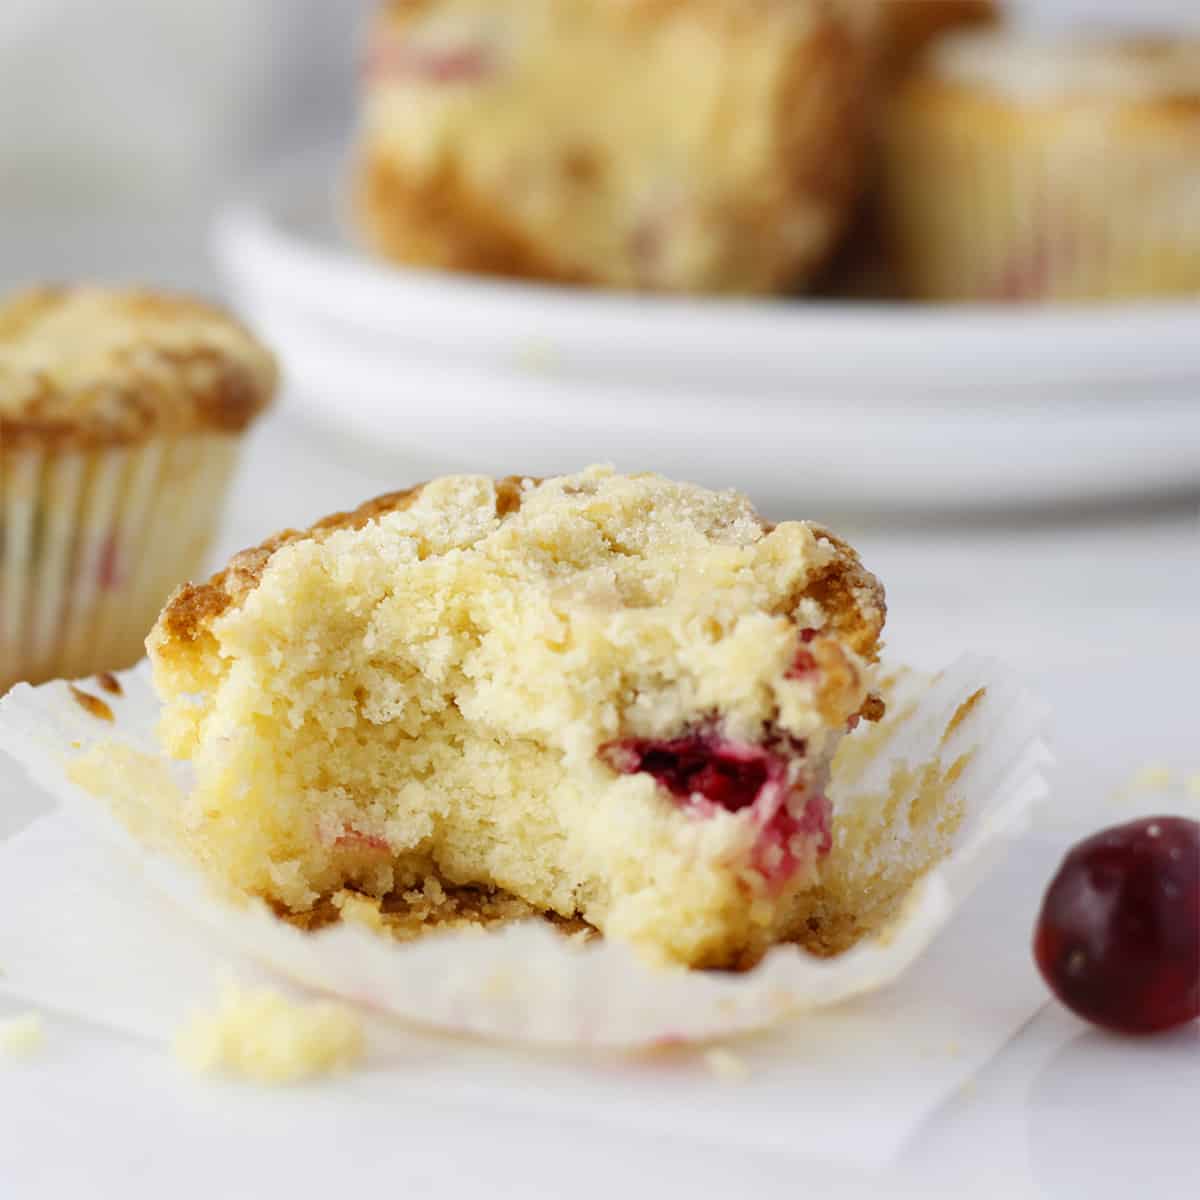 baked cranberry orange muffin with a bite on a dish.